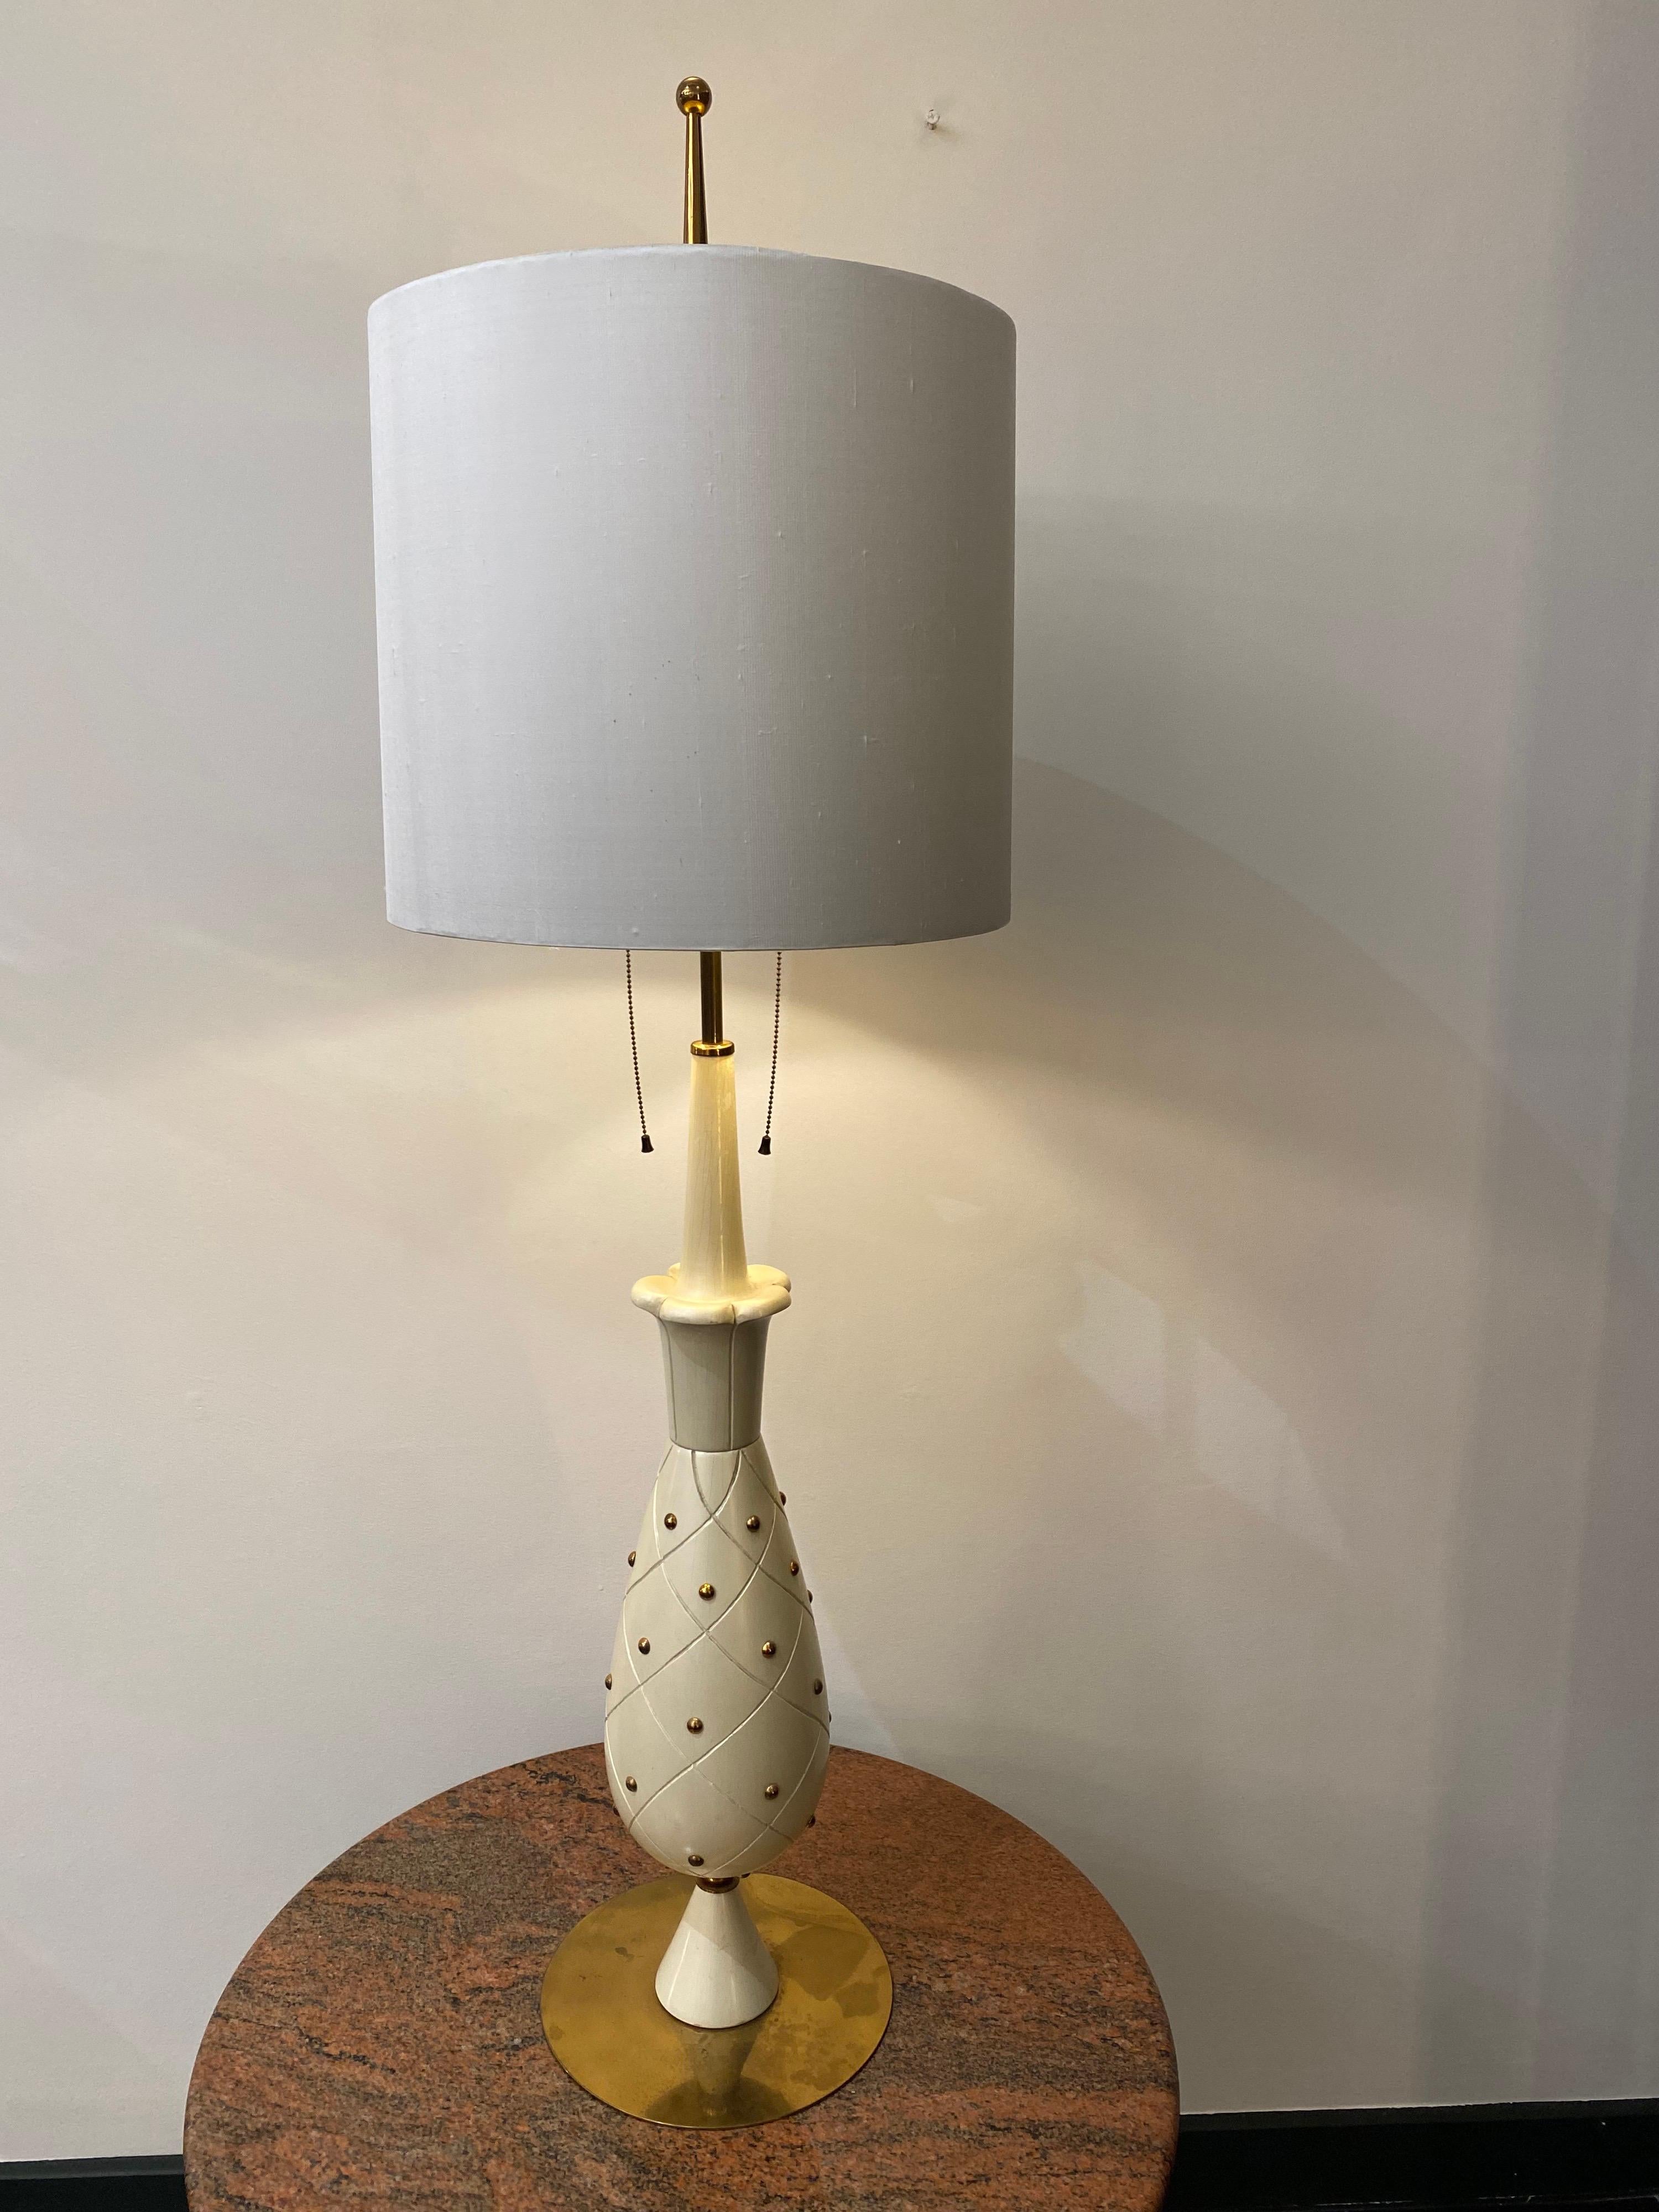 A rare pearlescent enamelled table lamp in carved wood and brass detailing depicting a pineapple att. to Silnovo. It has two light fixtures each operated by a brass pull switch.

Dimensions: Diameter: 42cm, Height: 120cm.

 